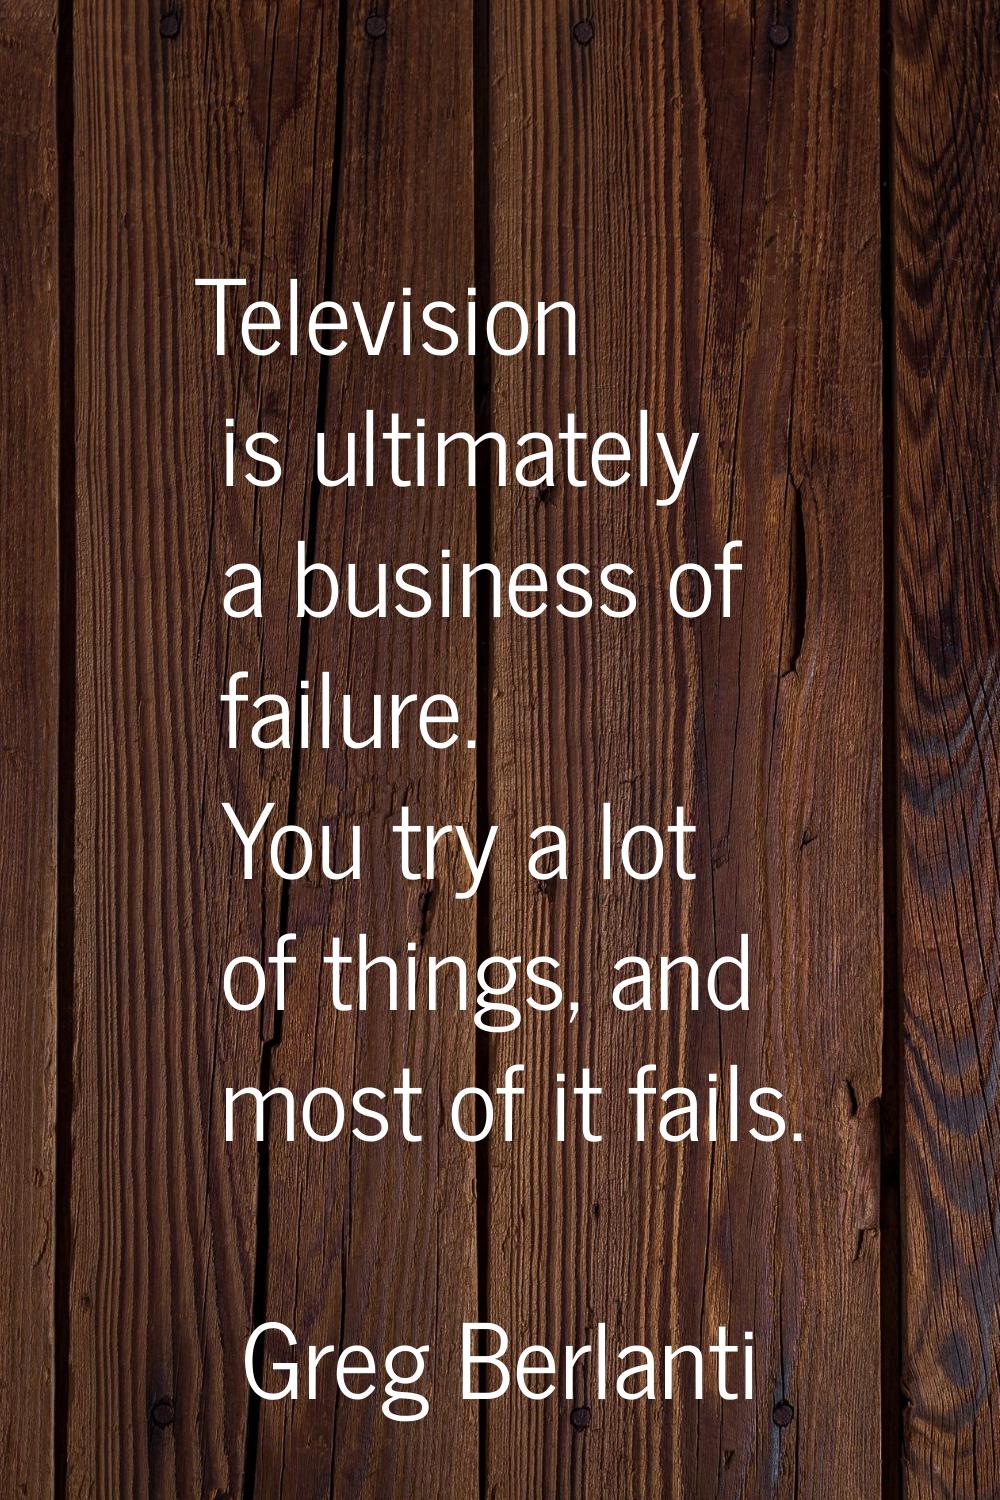 Television is ultimately a business of failure. You try a lot of things, and most of it fails.